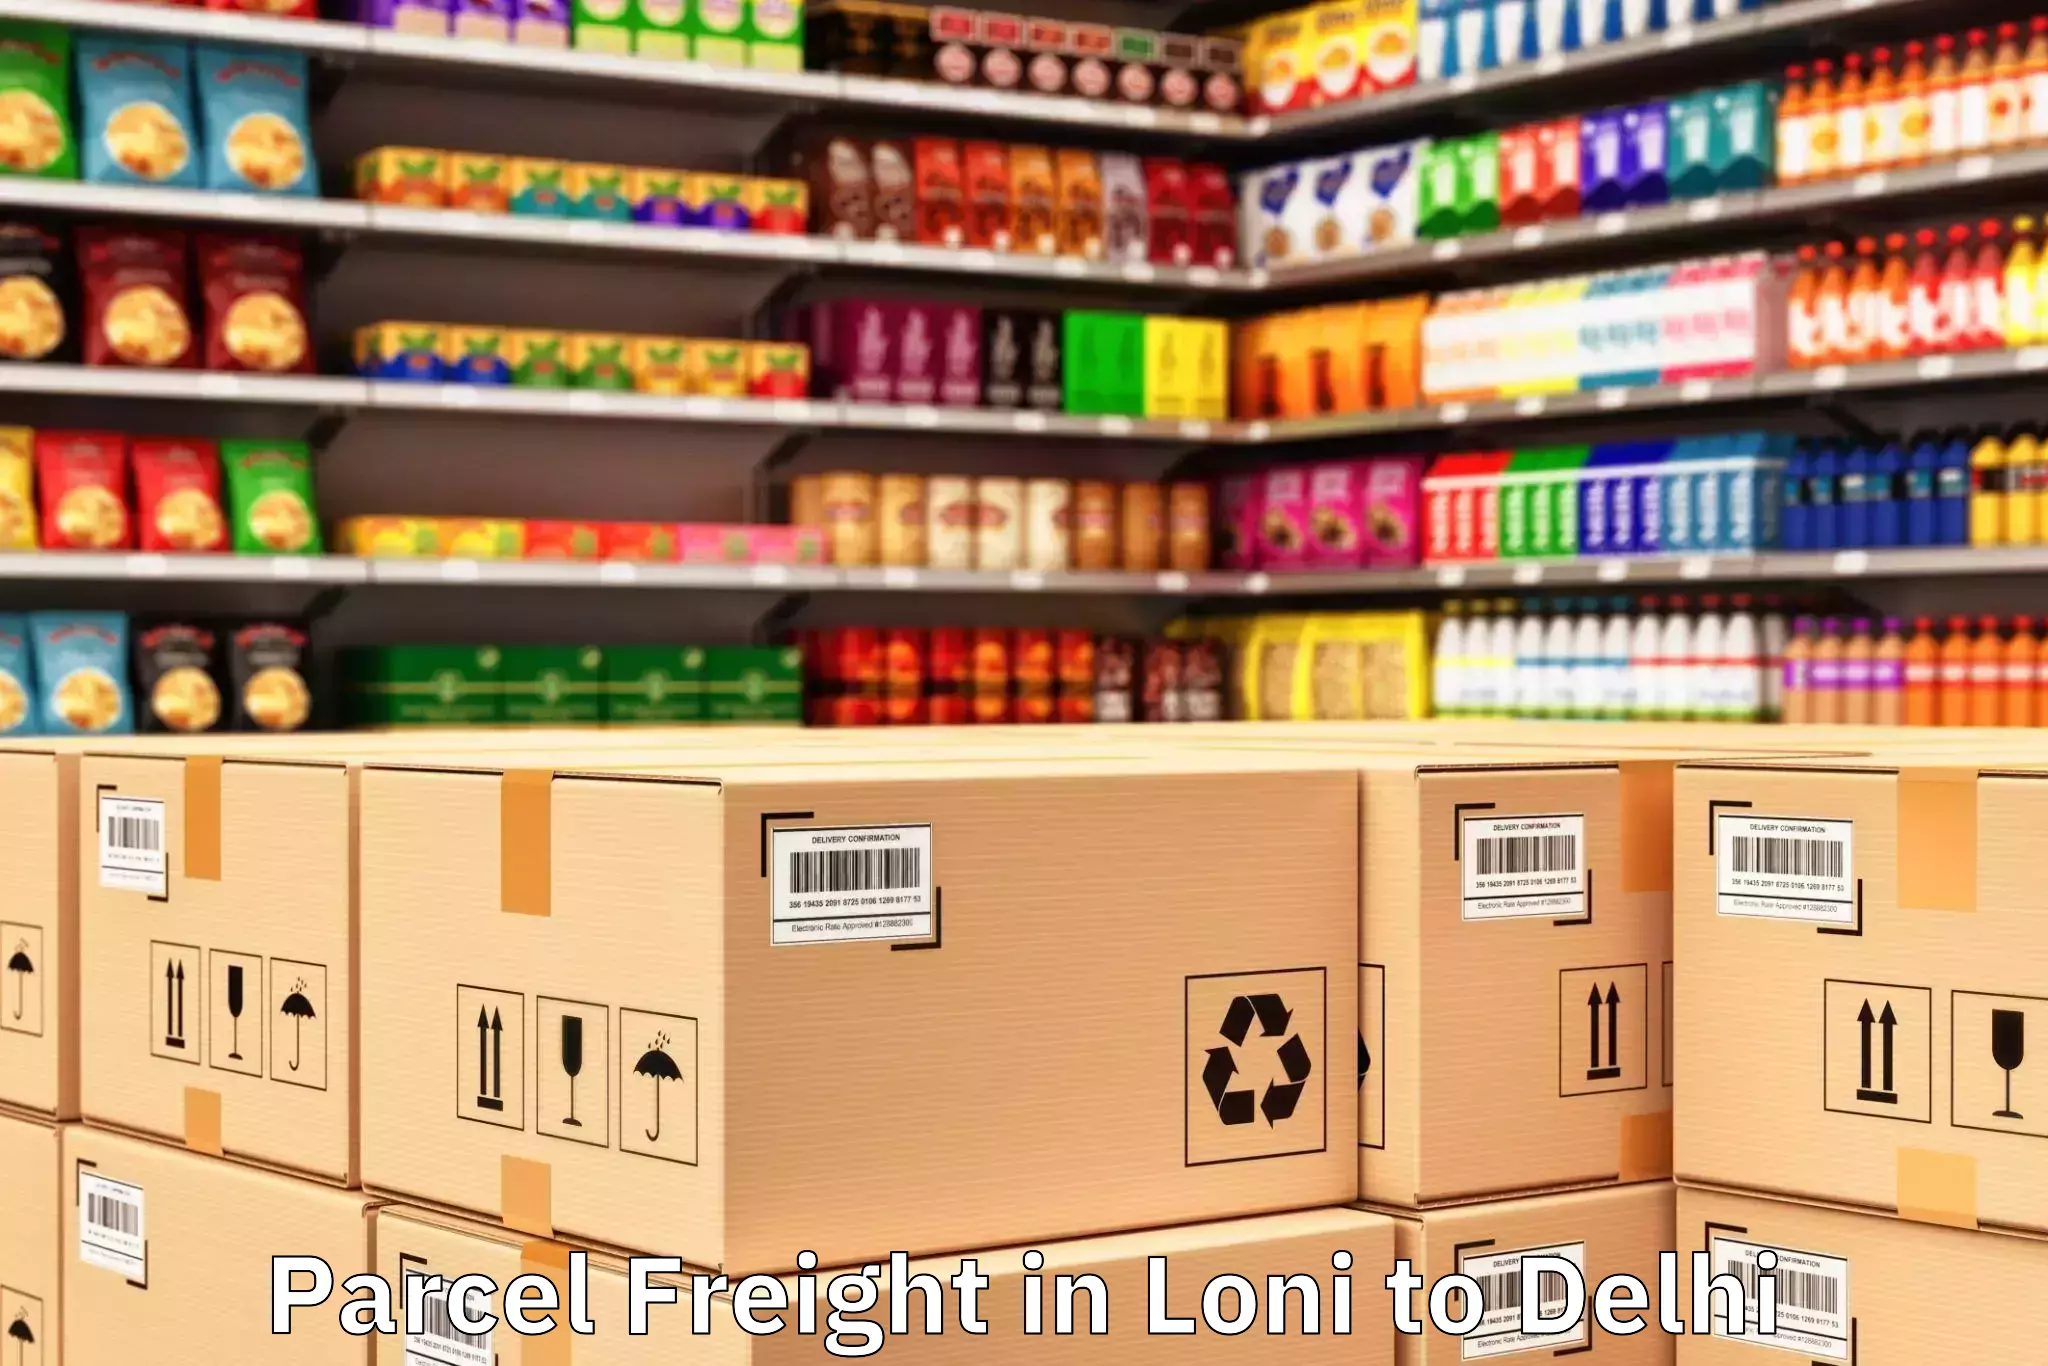 Expert Loni to Ansal Crown Plaza Mall Parcel Freight